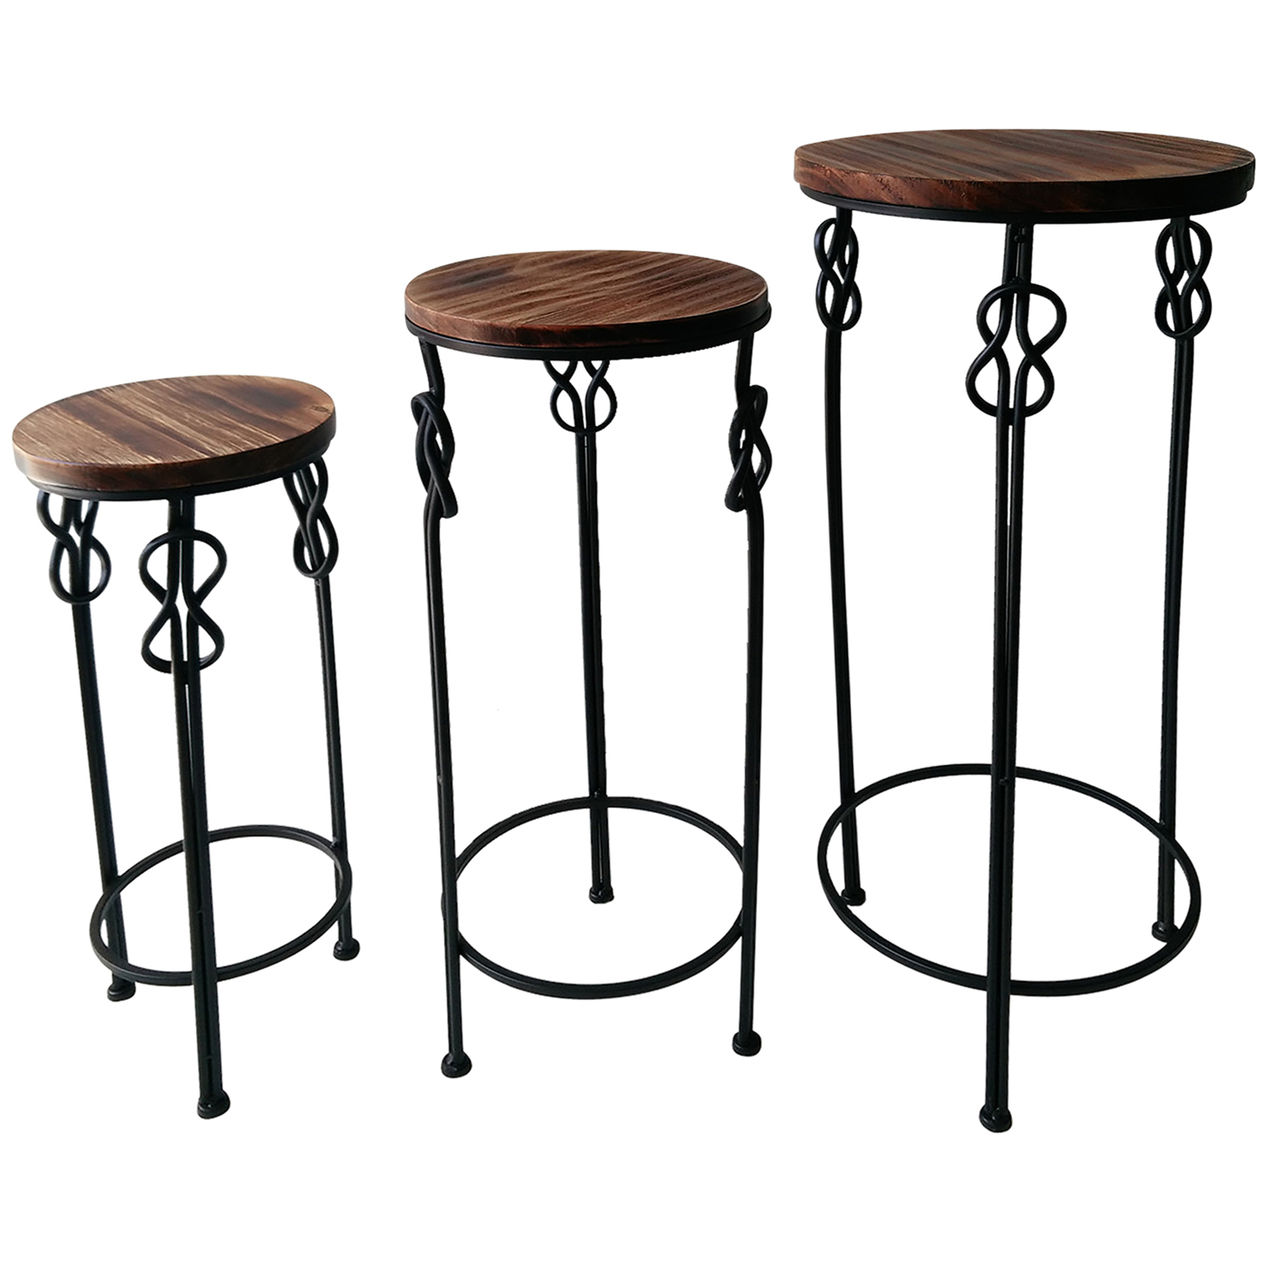 large round wood steel knot accent table home amp pulaski corner curio cabinet kijiji outdoor furniture wine chiller coffee glass white unfinished dining modern patio side mosaic